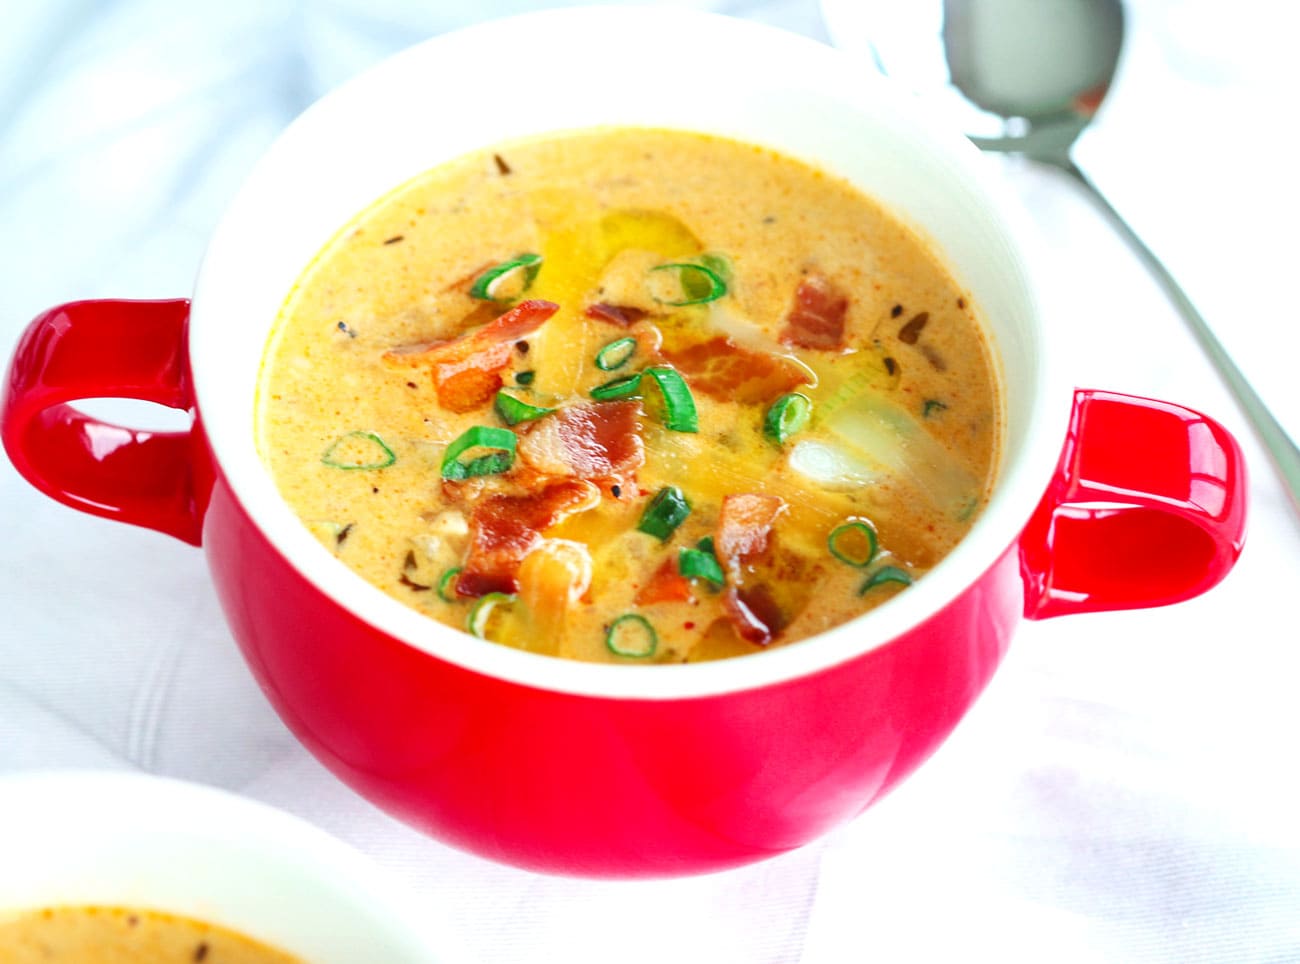 https://thatspicychick.com/wp-content/uploads/2018/12/Kicked-Up-Creamy-Clam-Chowder-6_PS-1.jpg